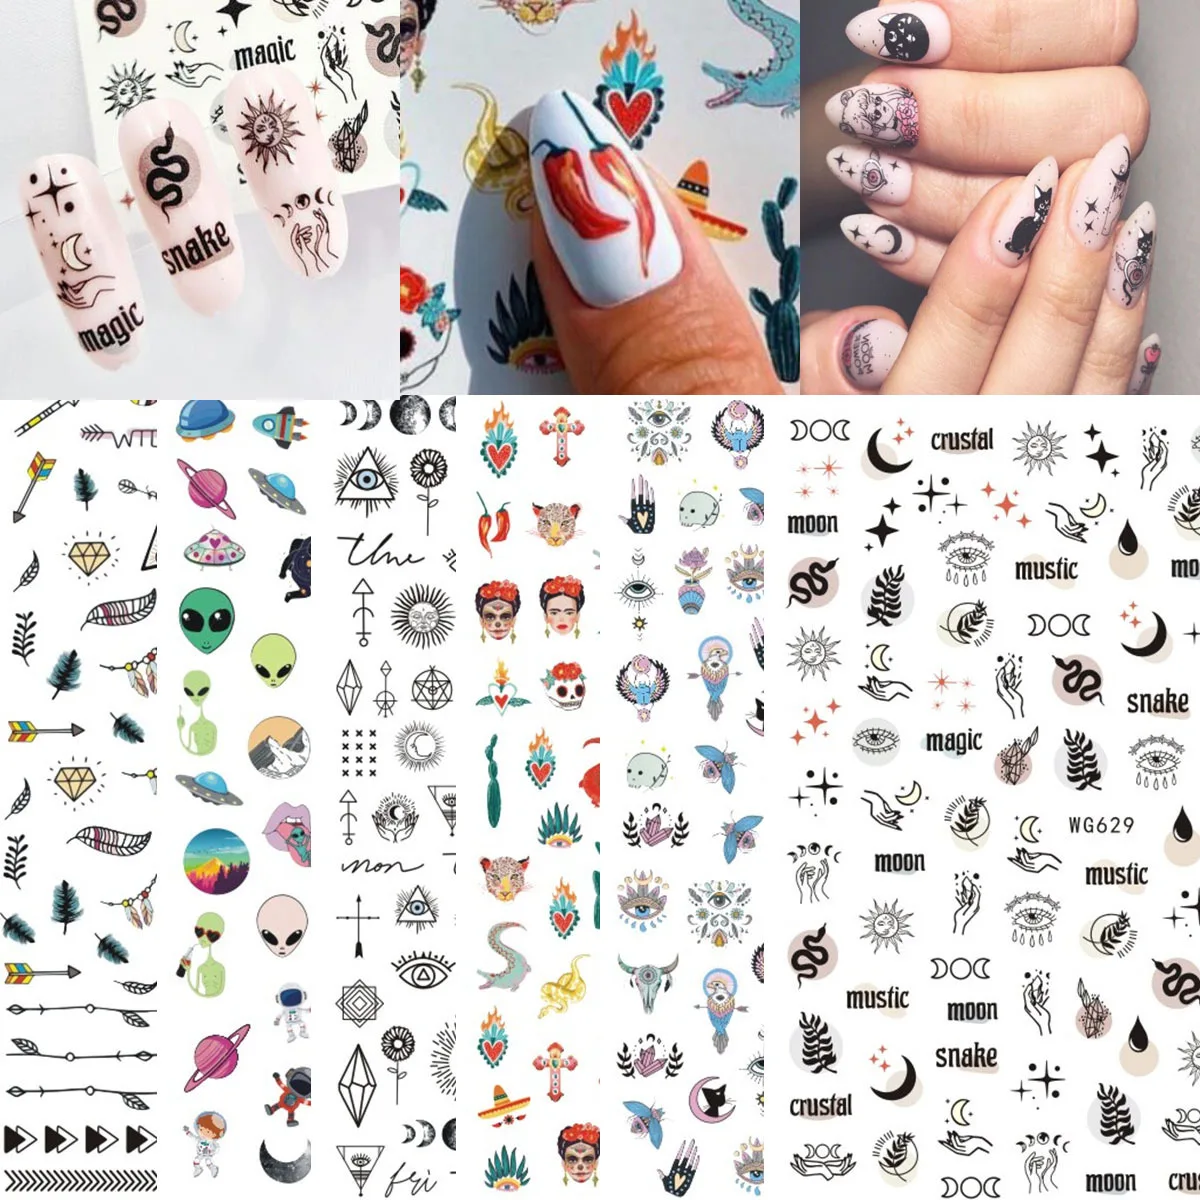 

Wholesale New Designs Indian Elements 3D Nail Art Sticker Nail Decals Manicure Nail Art Decoration, As shown